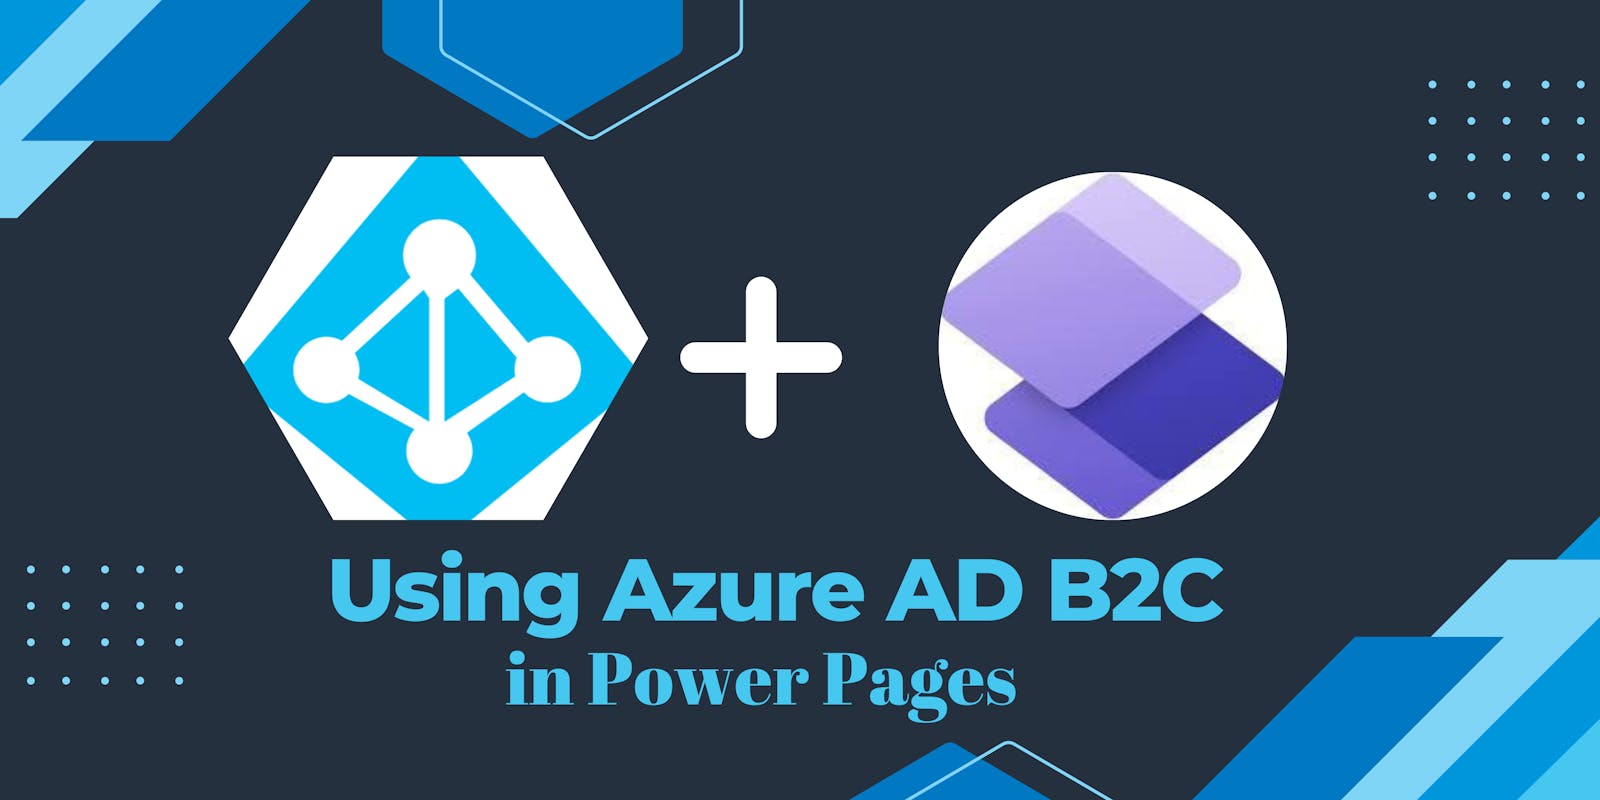 Using Azure AD B2C as an identity provider in Power Pages